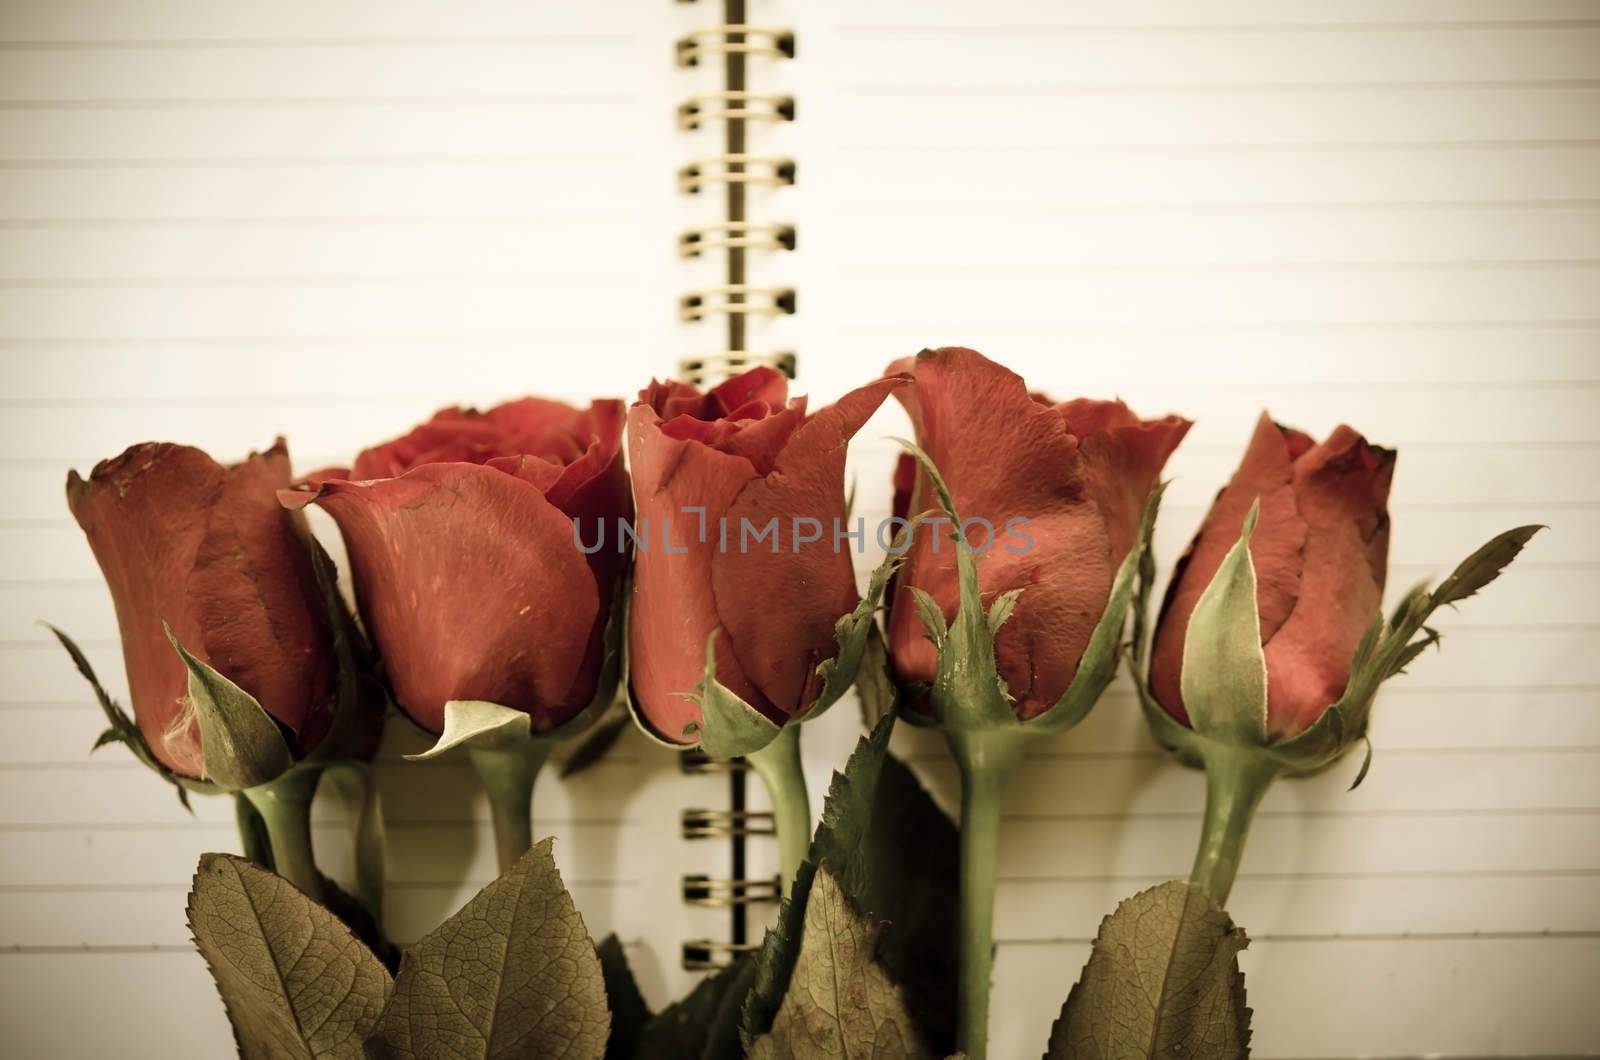 Vintage style - Red rose flower and open Notepad book.